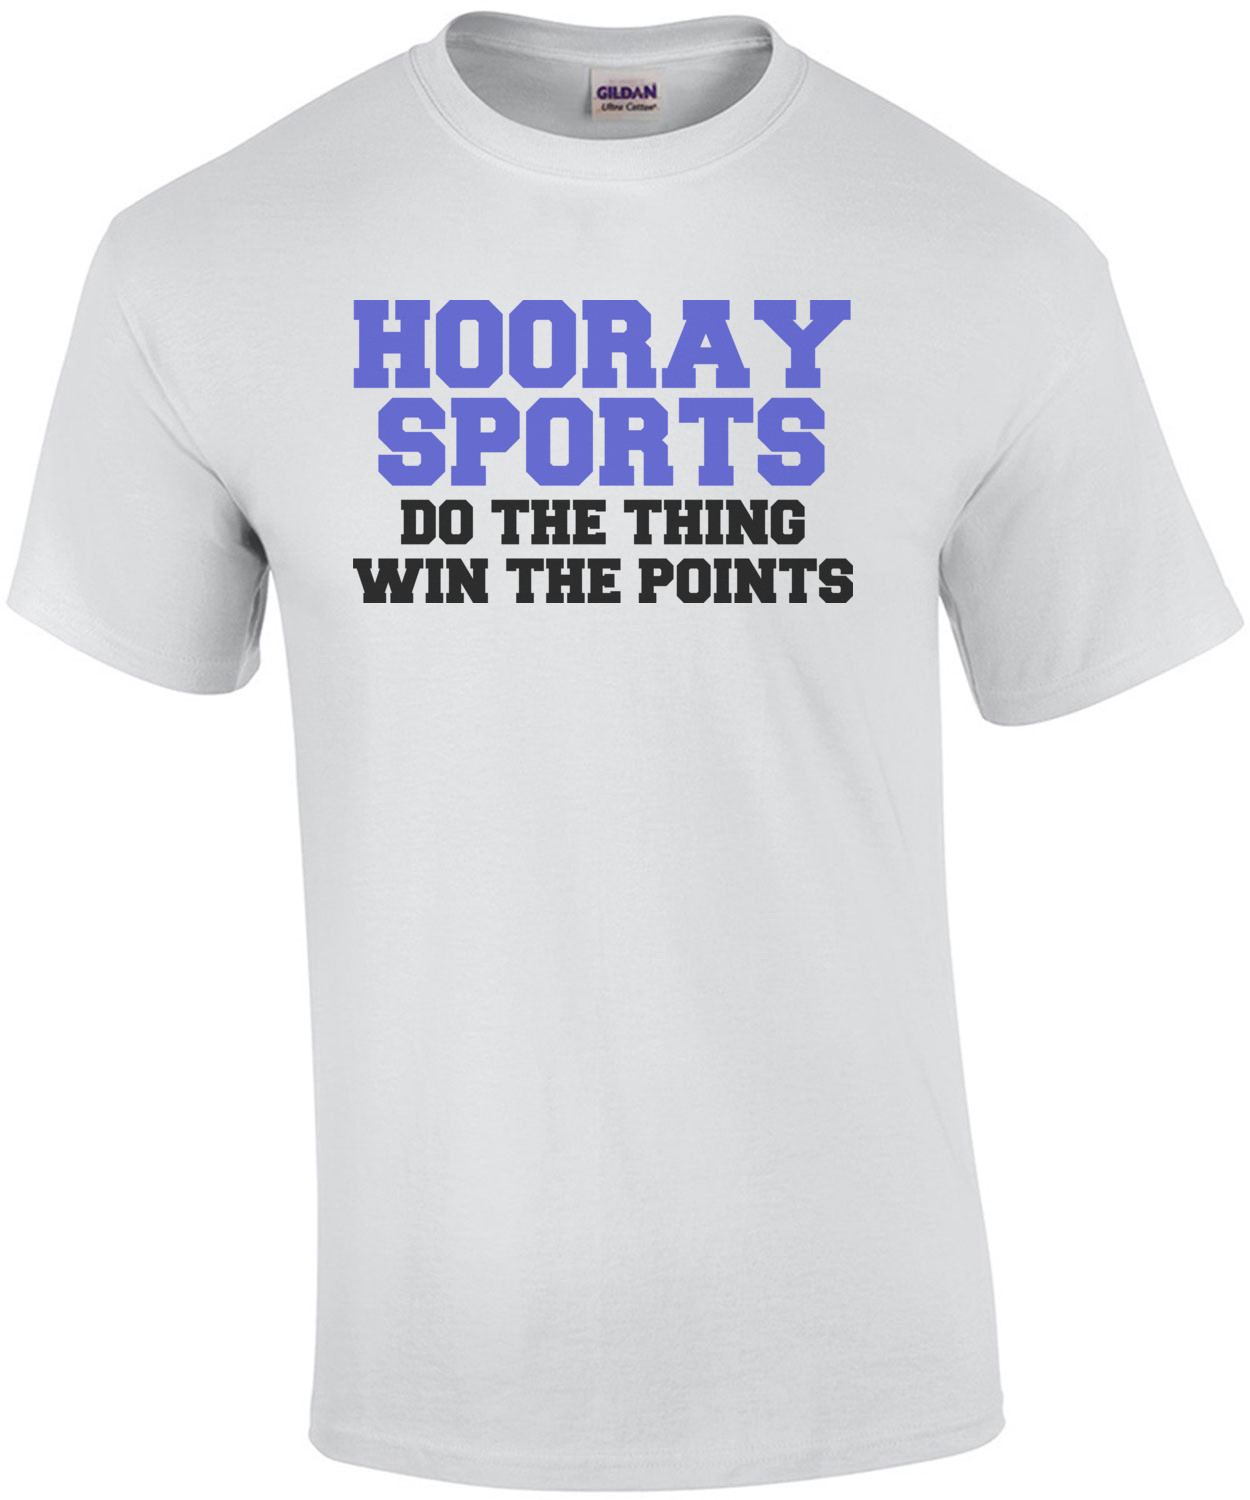 Hooray Sports! Do The Thing Win The Points Shirt